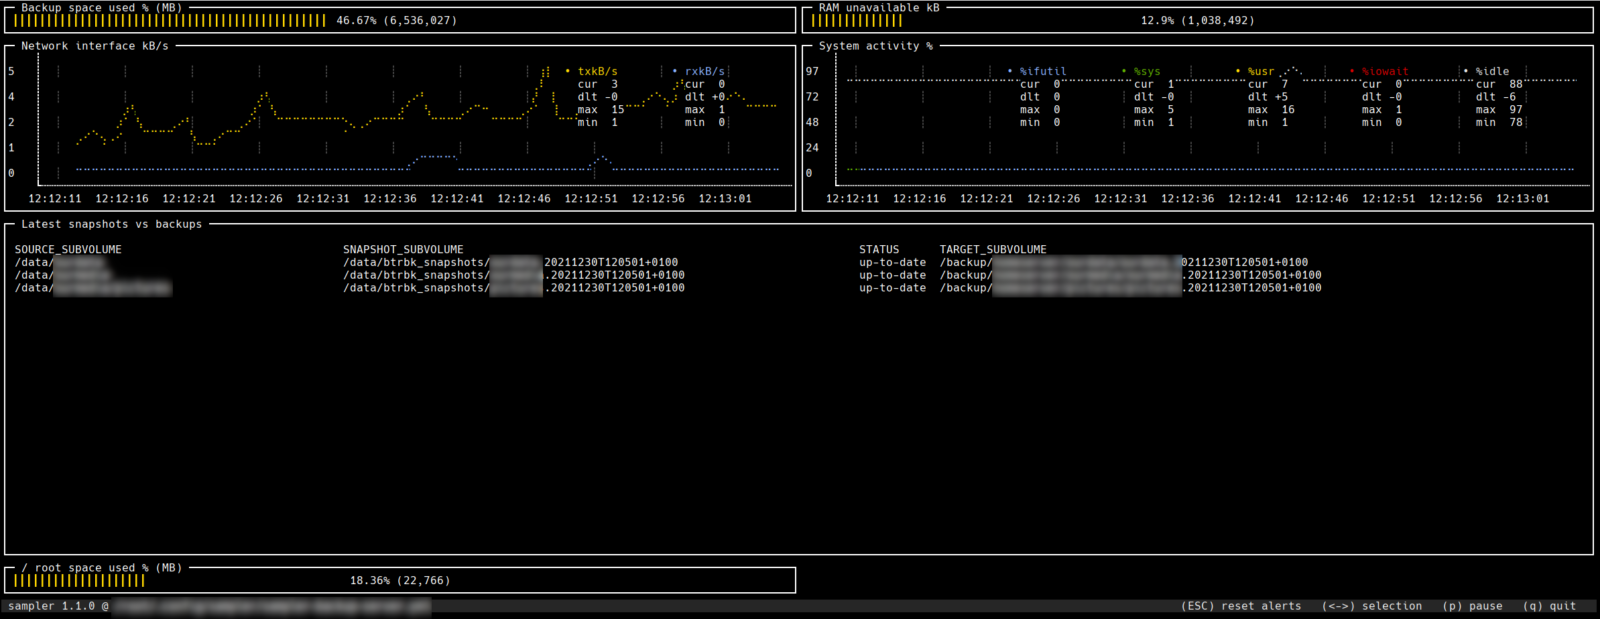 A console dashboard as displayed by the application "sampler". At the top, two gauges display the usage (in percent) for a backup volume and the RAM. Below, two running graphs displaying network traffic and system activity. Below, a table showing the most recent btrfs snapshots taken by btrbk, vs the snapshots that have been backed up. Finally, a gauge displaying the usage (in percent) for the root file system.